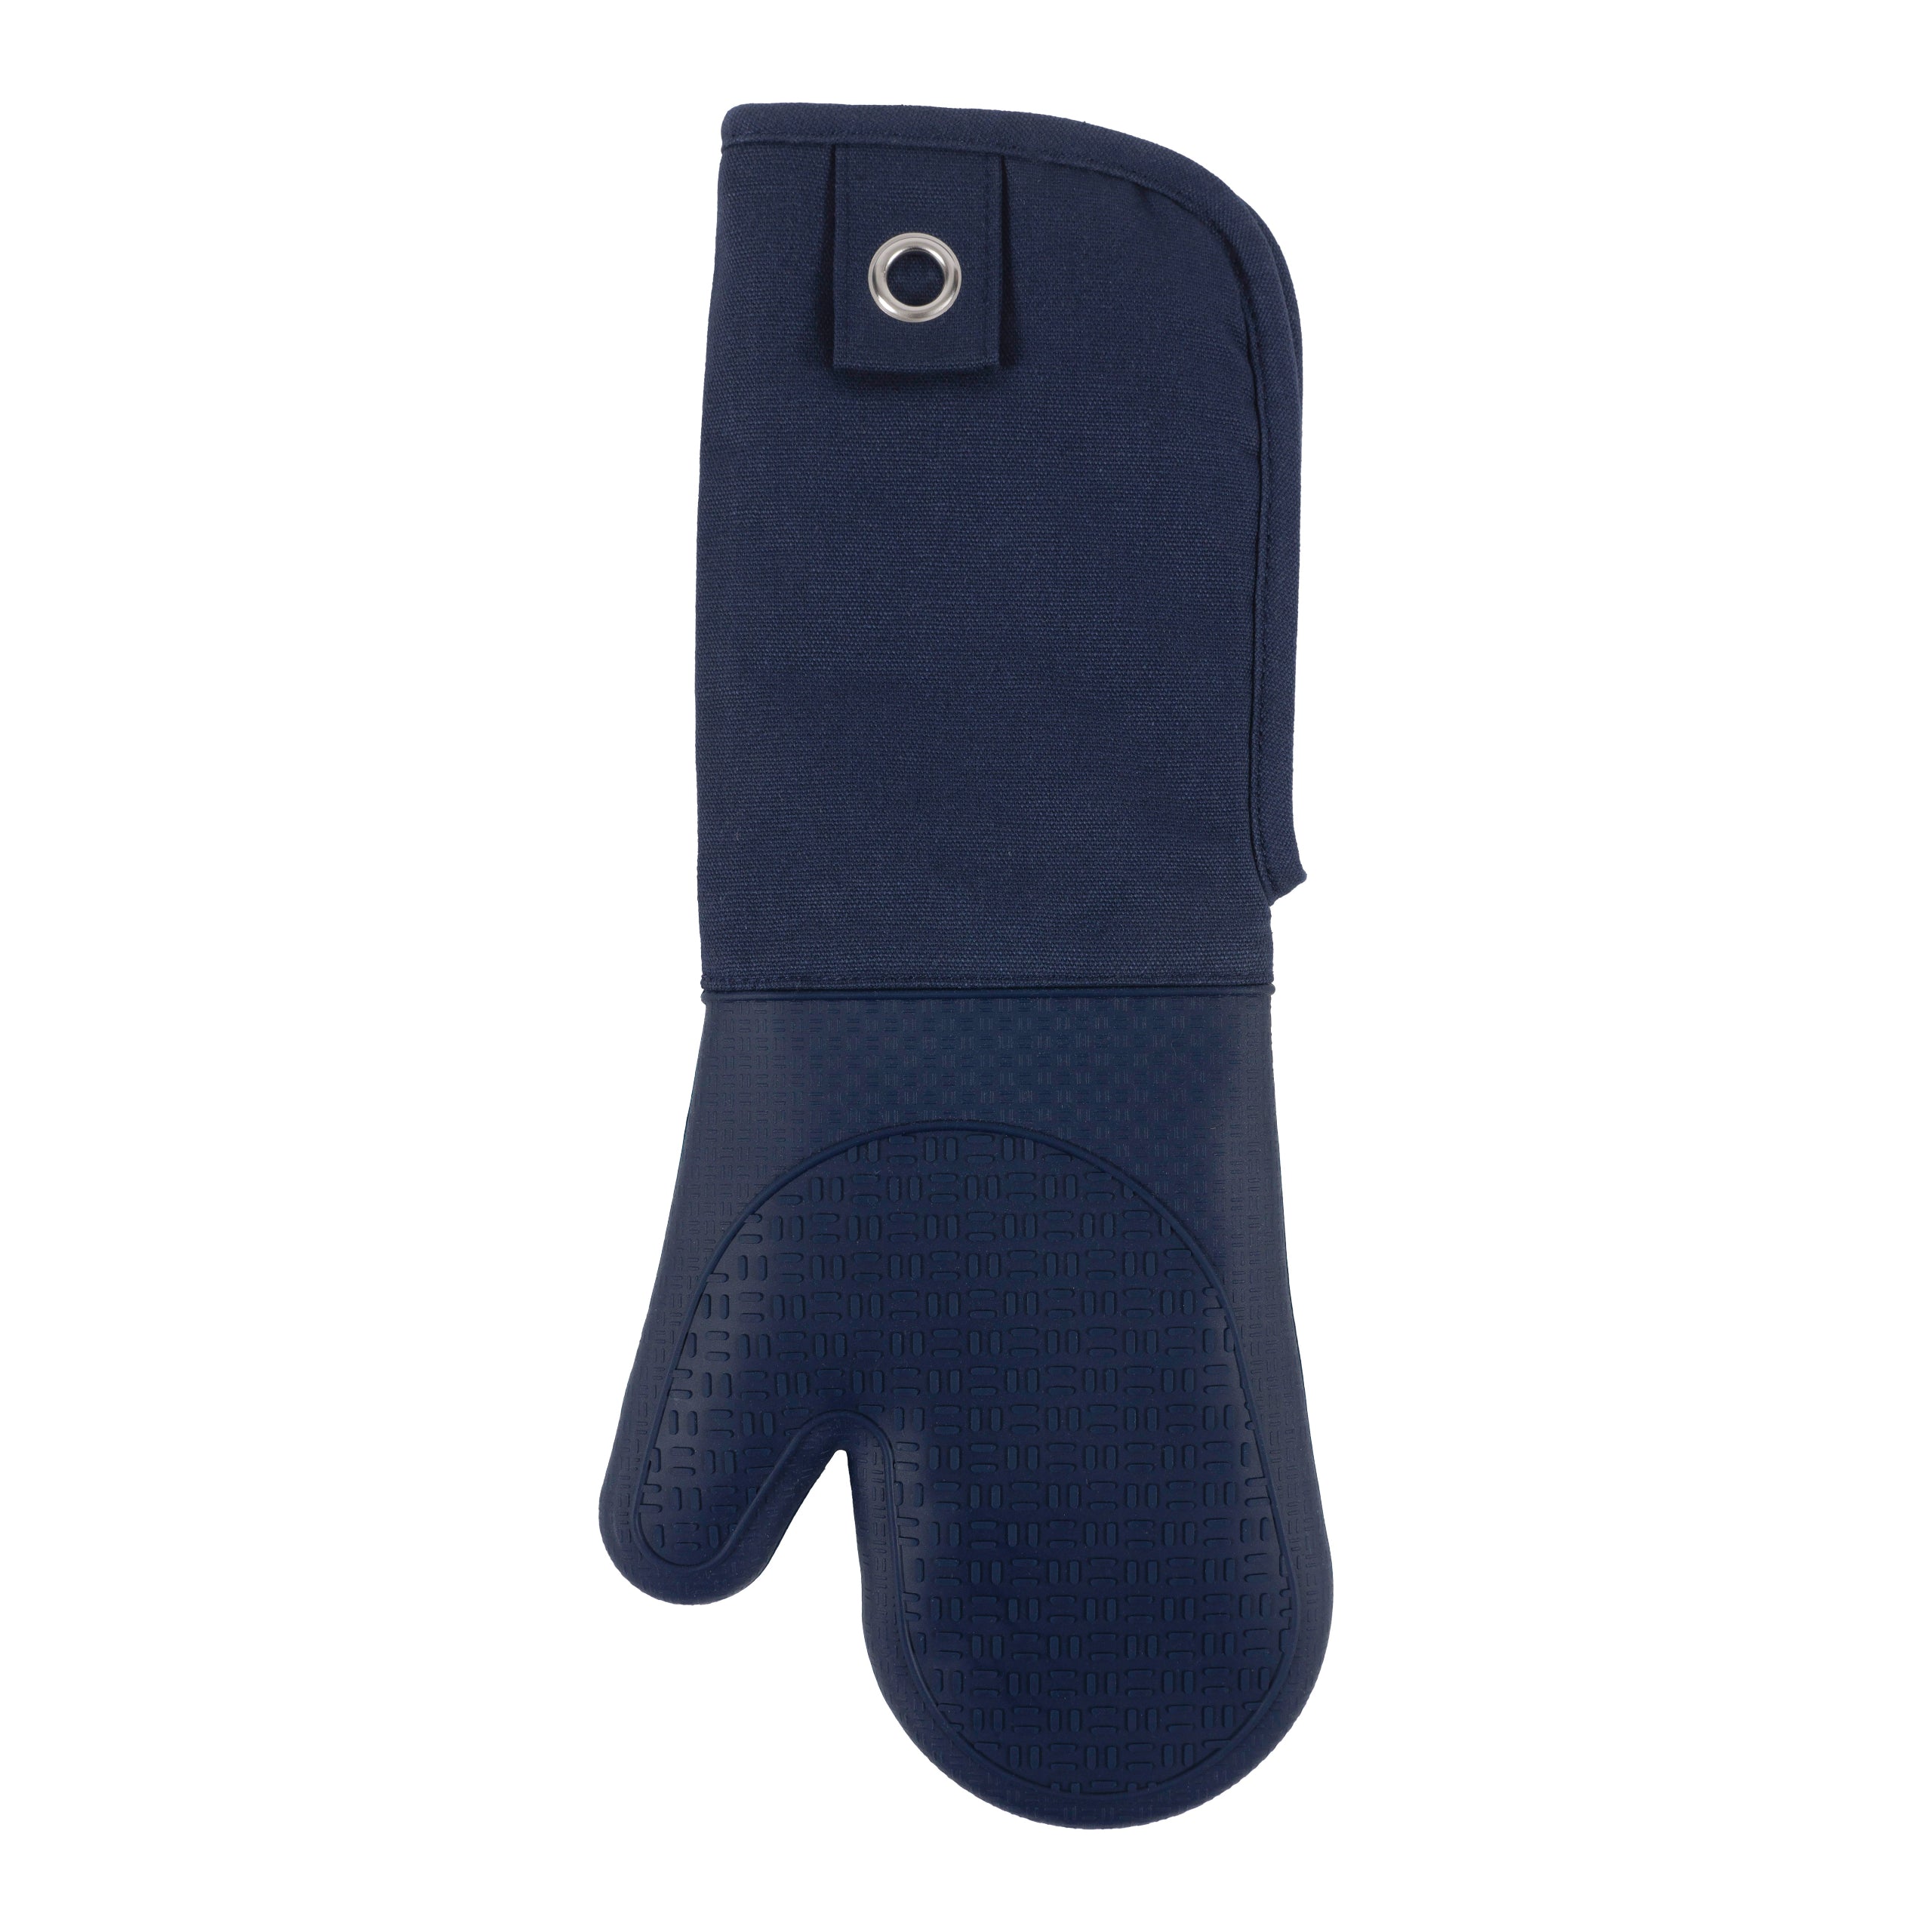 Gourmet Classics 17 Silicone Oven Mitt With Grommet - Gray